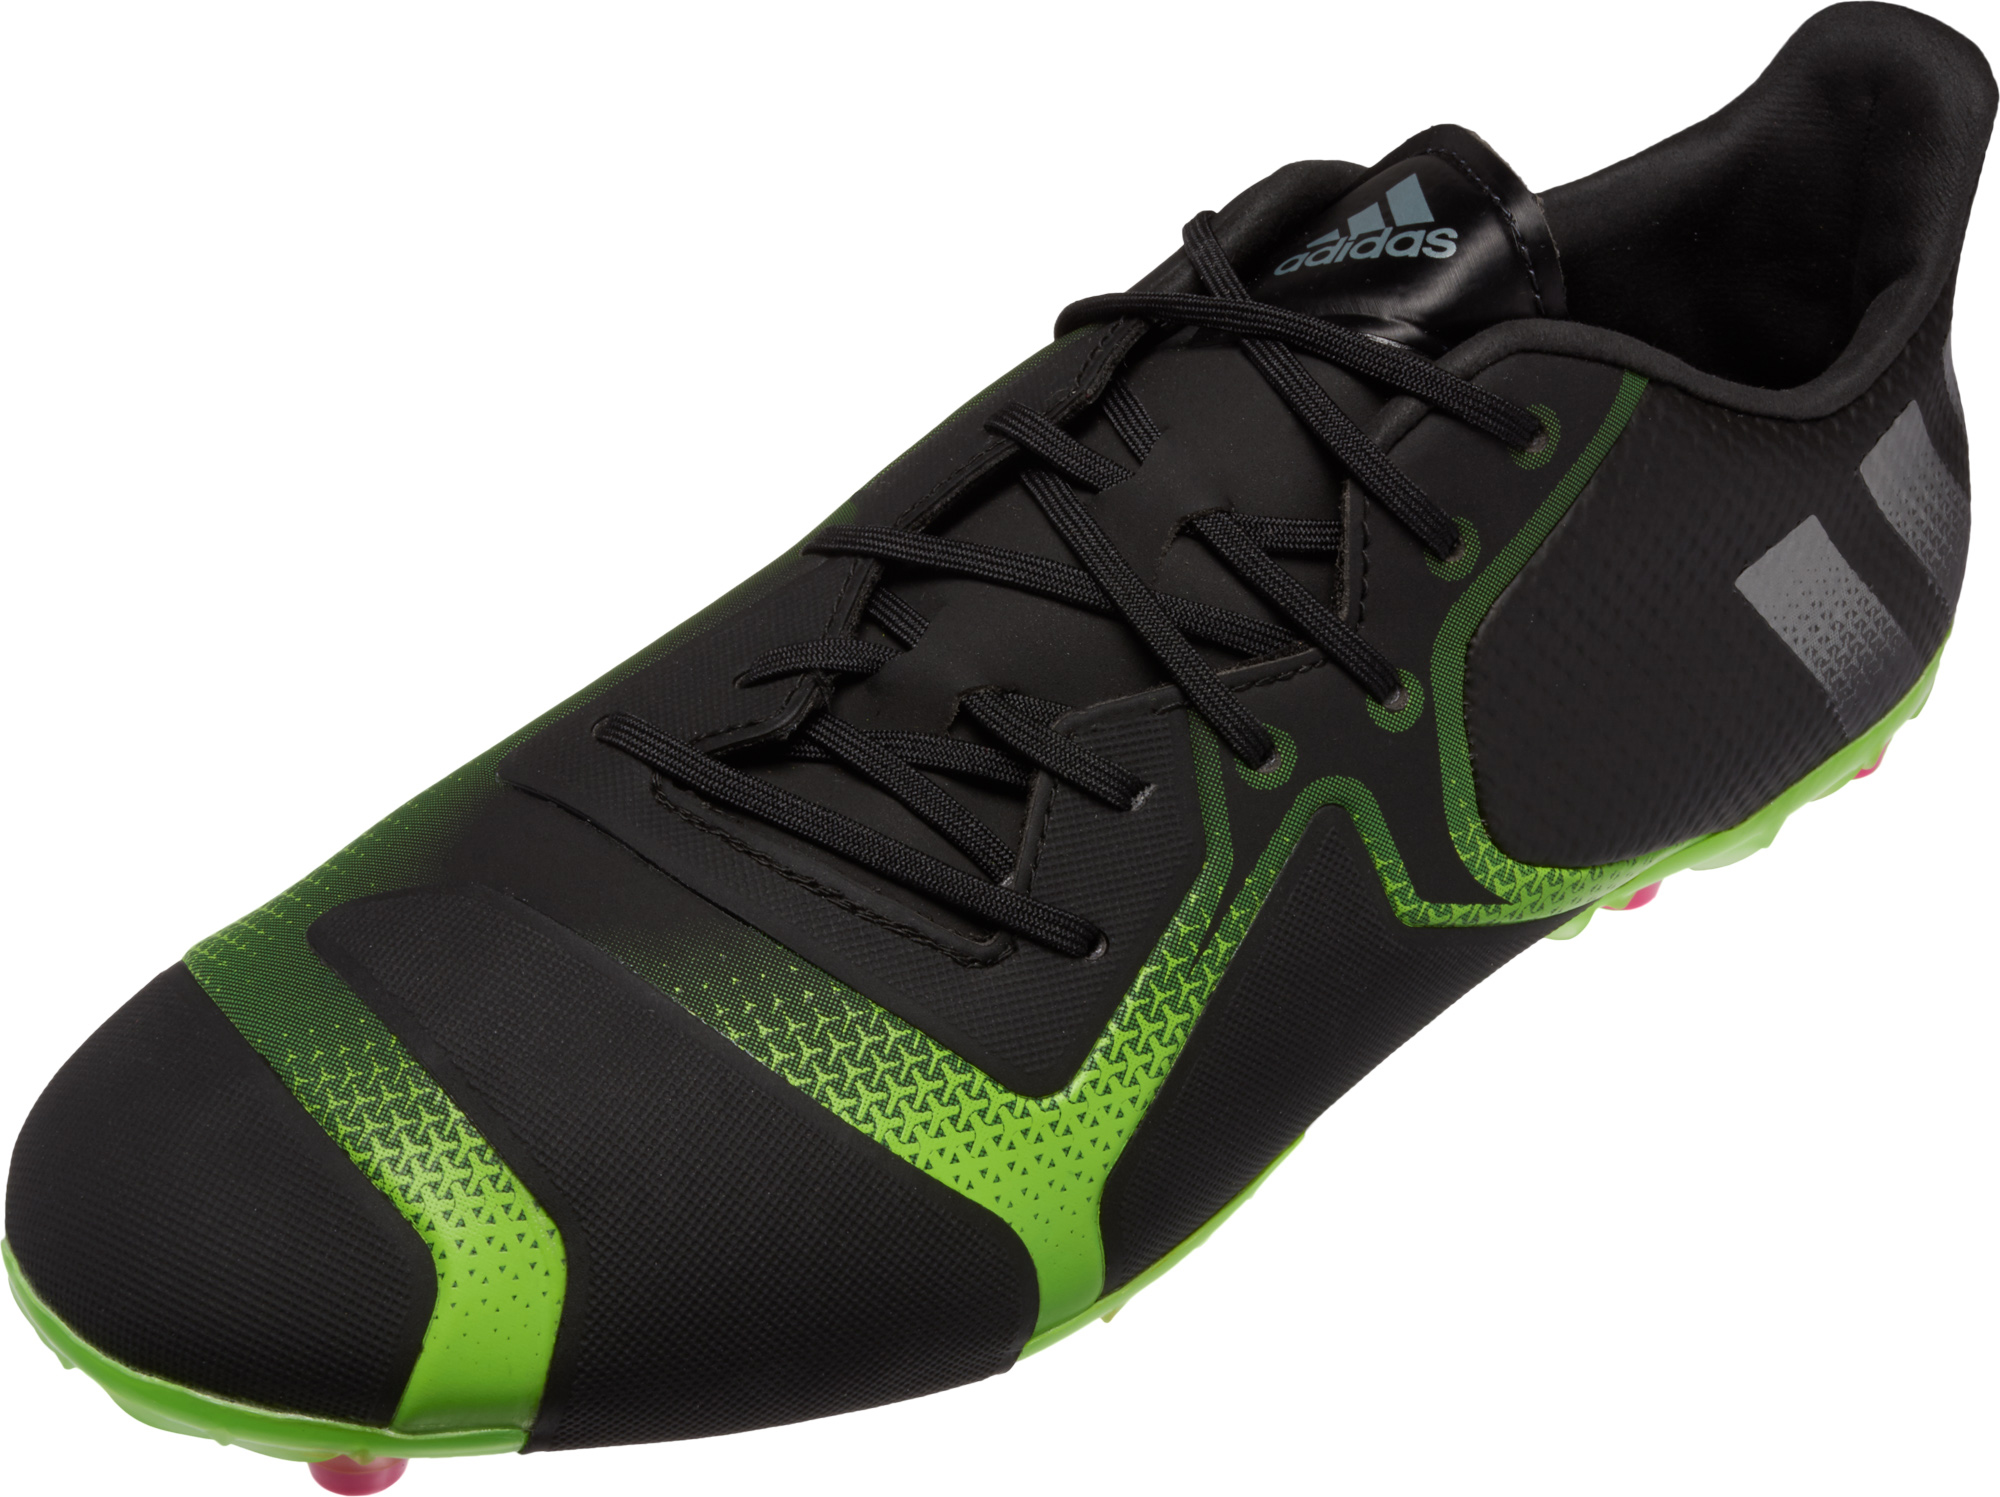 adidas ACE 16 TKRZ Soccer Shoes - Green ACE 16 TKRZ Soccer Cleats